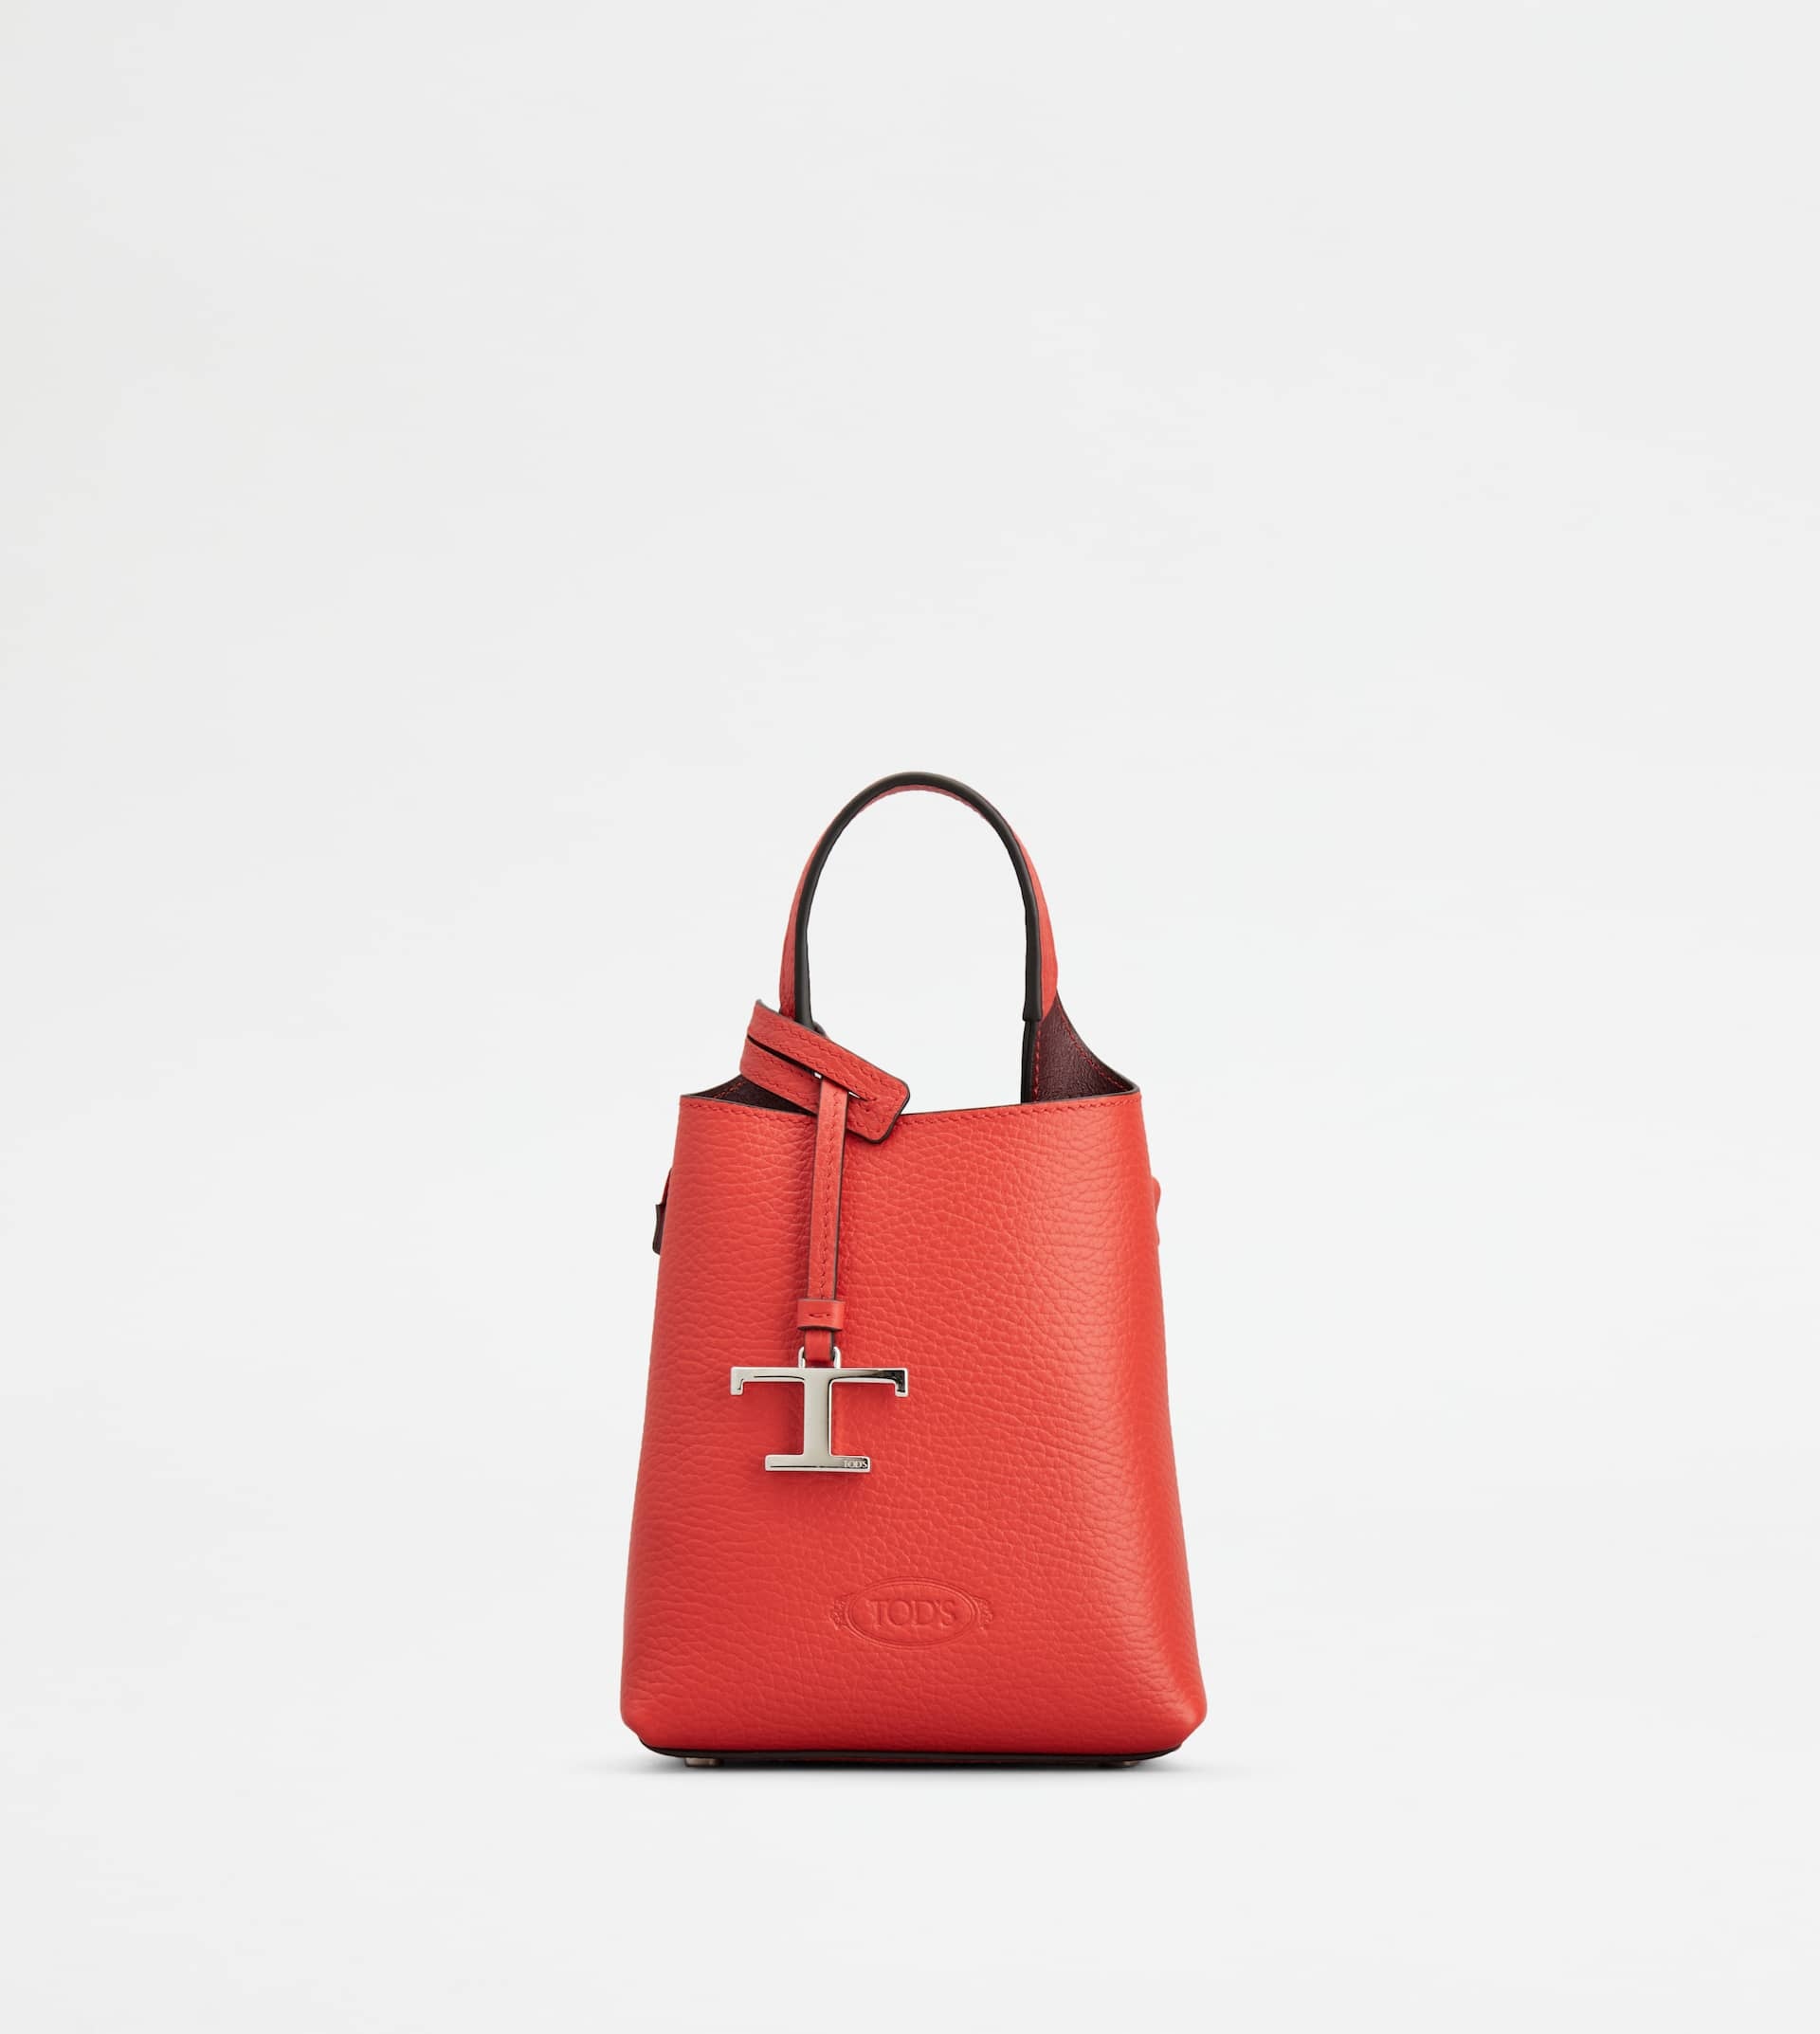 TOD'S MICRO BAG IN LEATHER - RED - 1